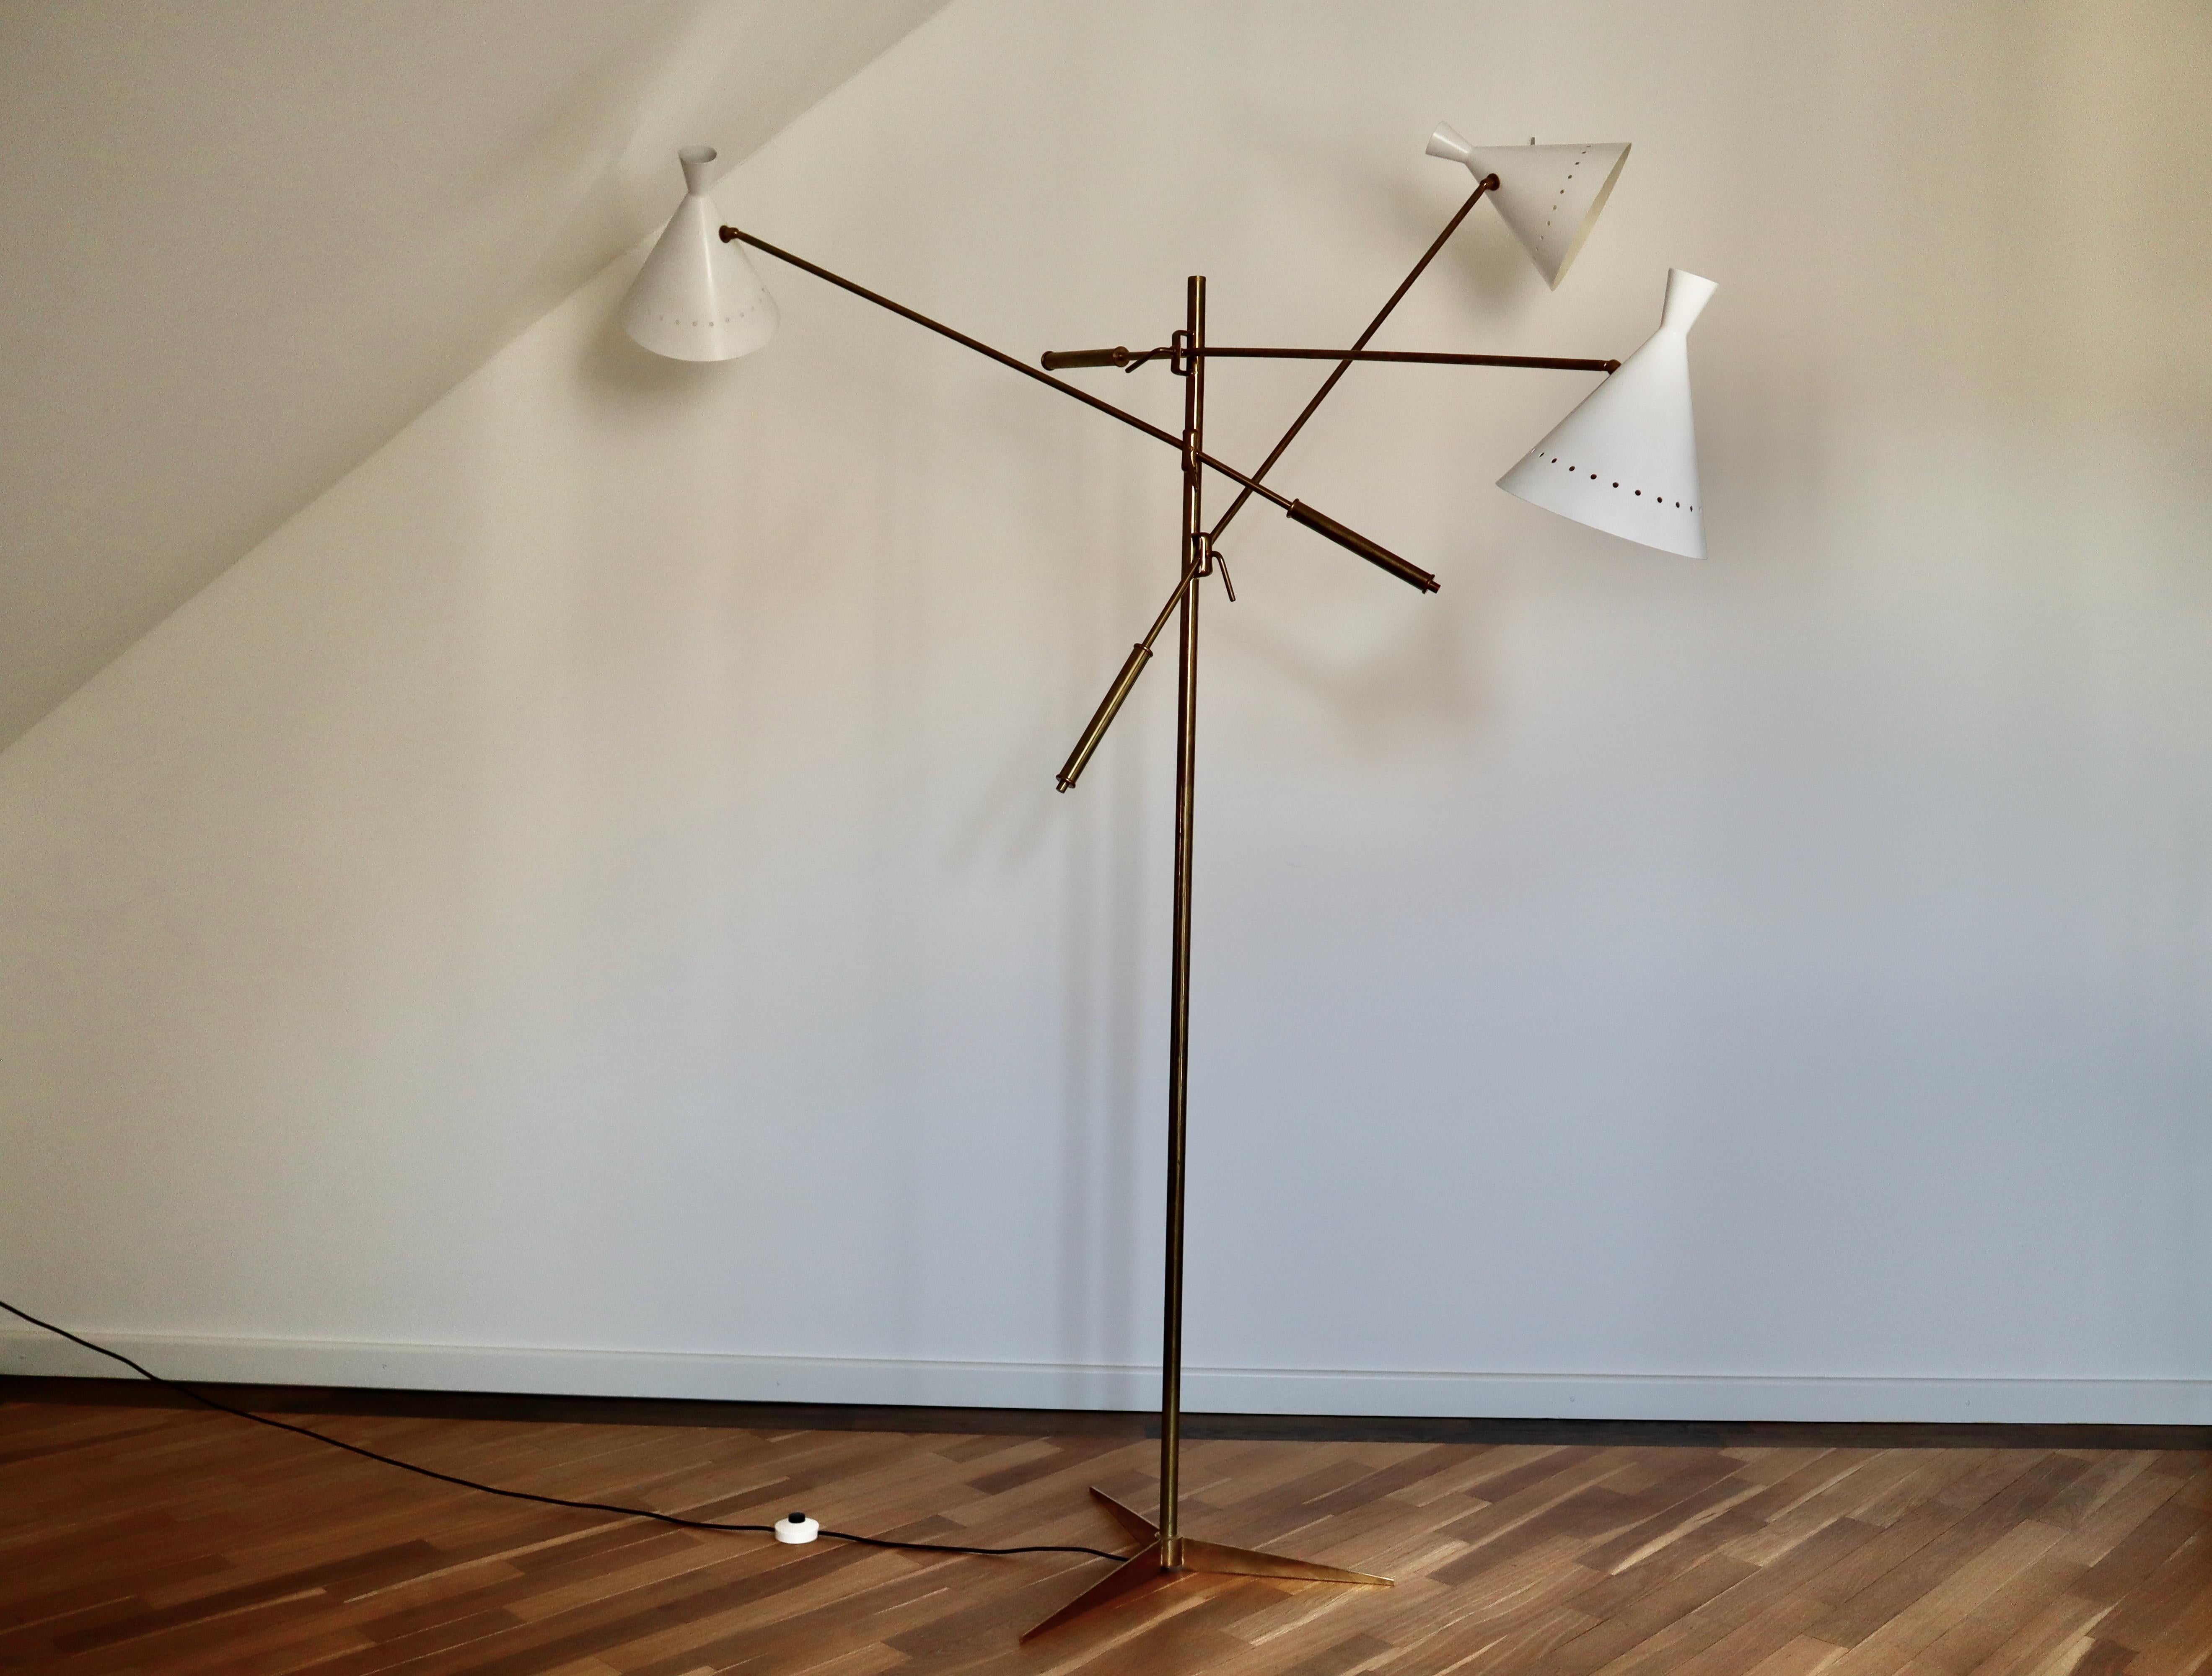 1950s Italian Mid Century Modern solid brass floor lamp. This lamp is potentially attributable to Alfred Lelli for Arredoluce and invokes the style of the era including Oscar Torlasco, Gio Ponti and Jean Royère. With a height over 6 feet and